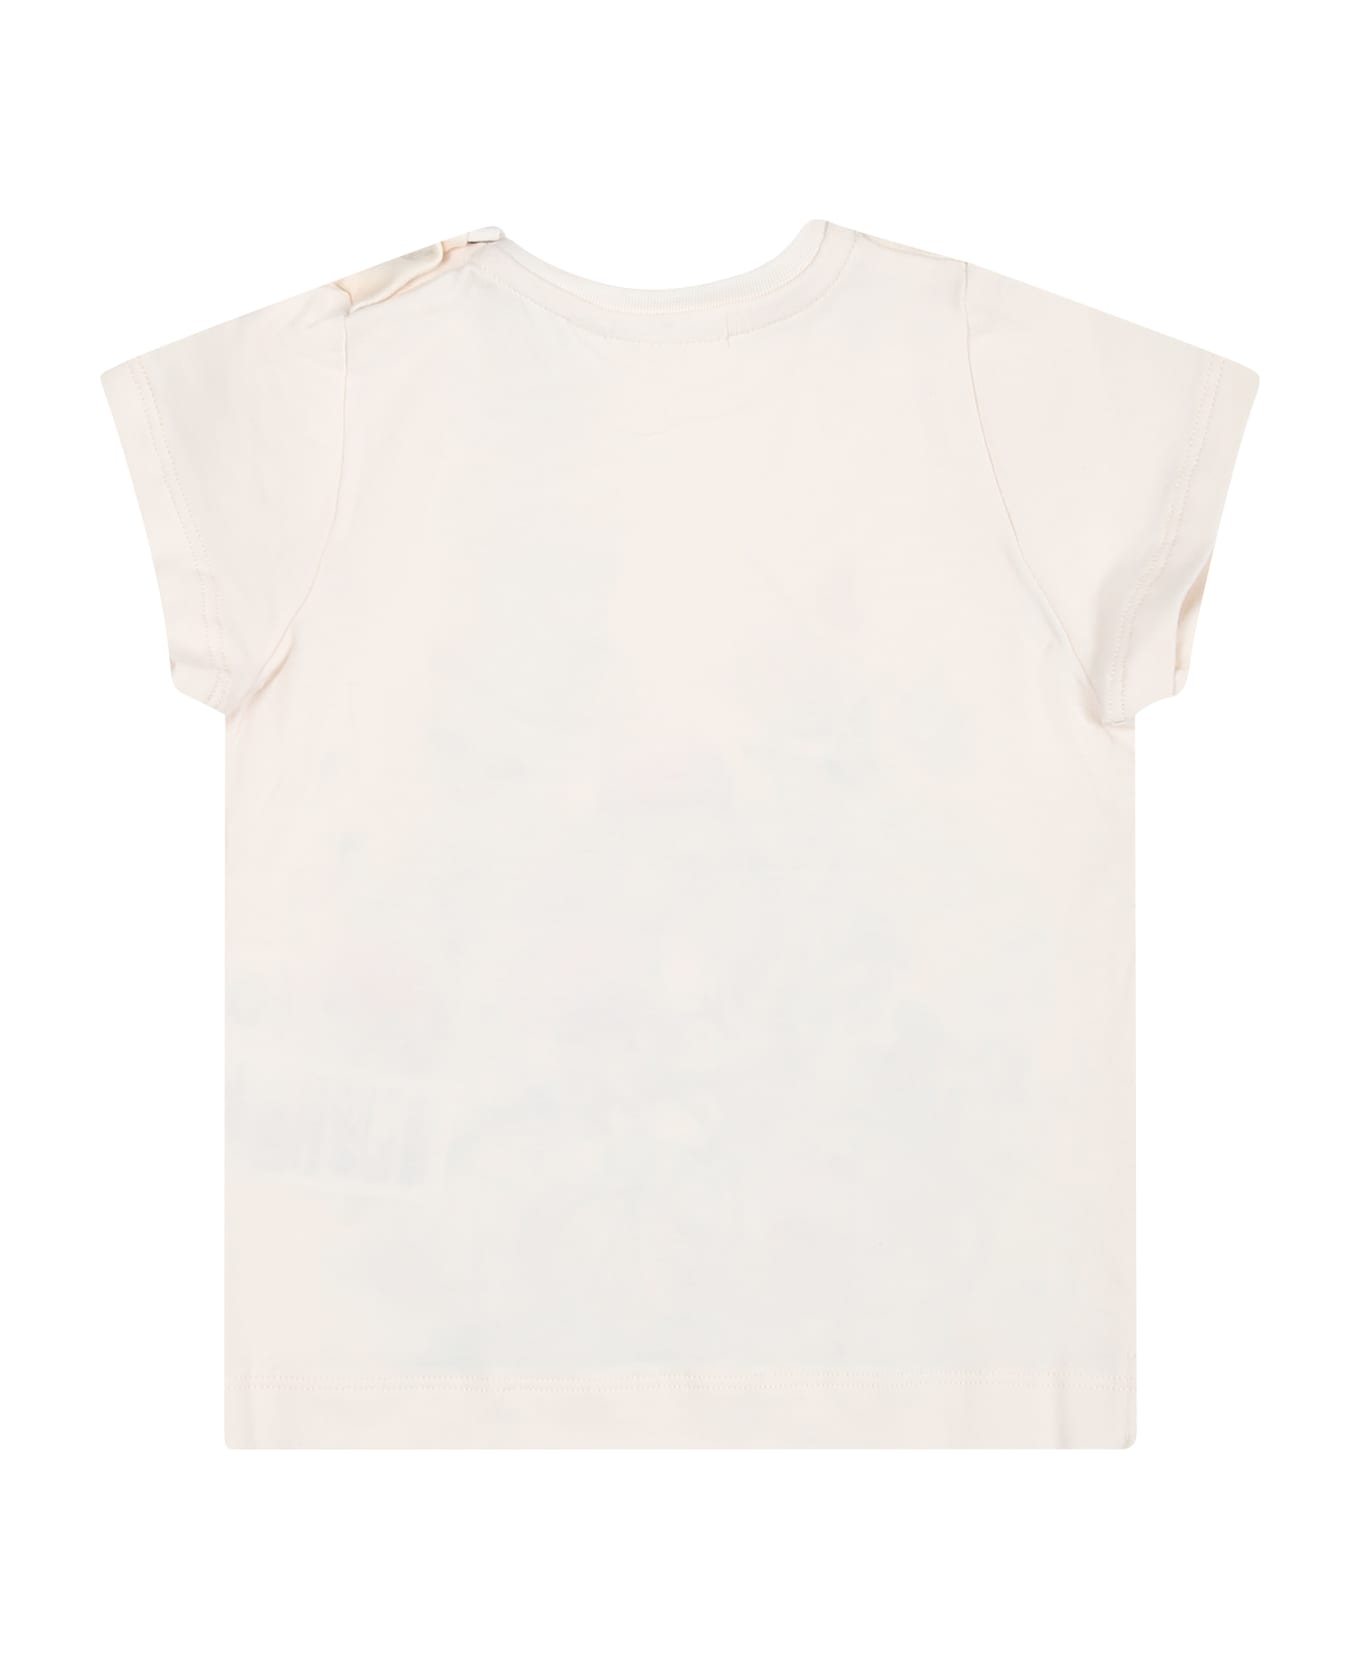 Molo Ivory T-shirt For Baby Girl - Ivory